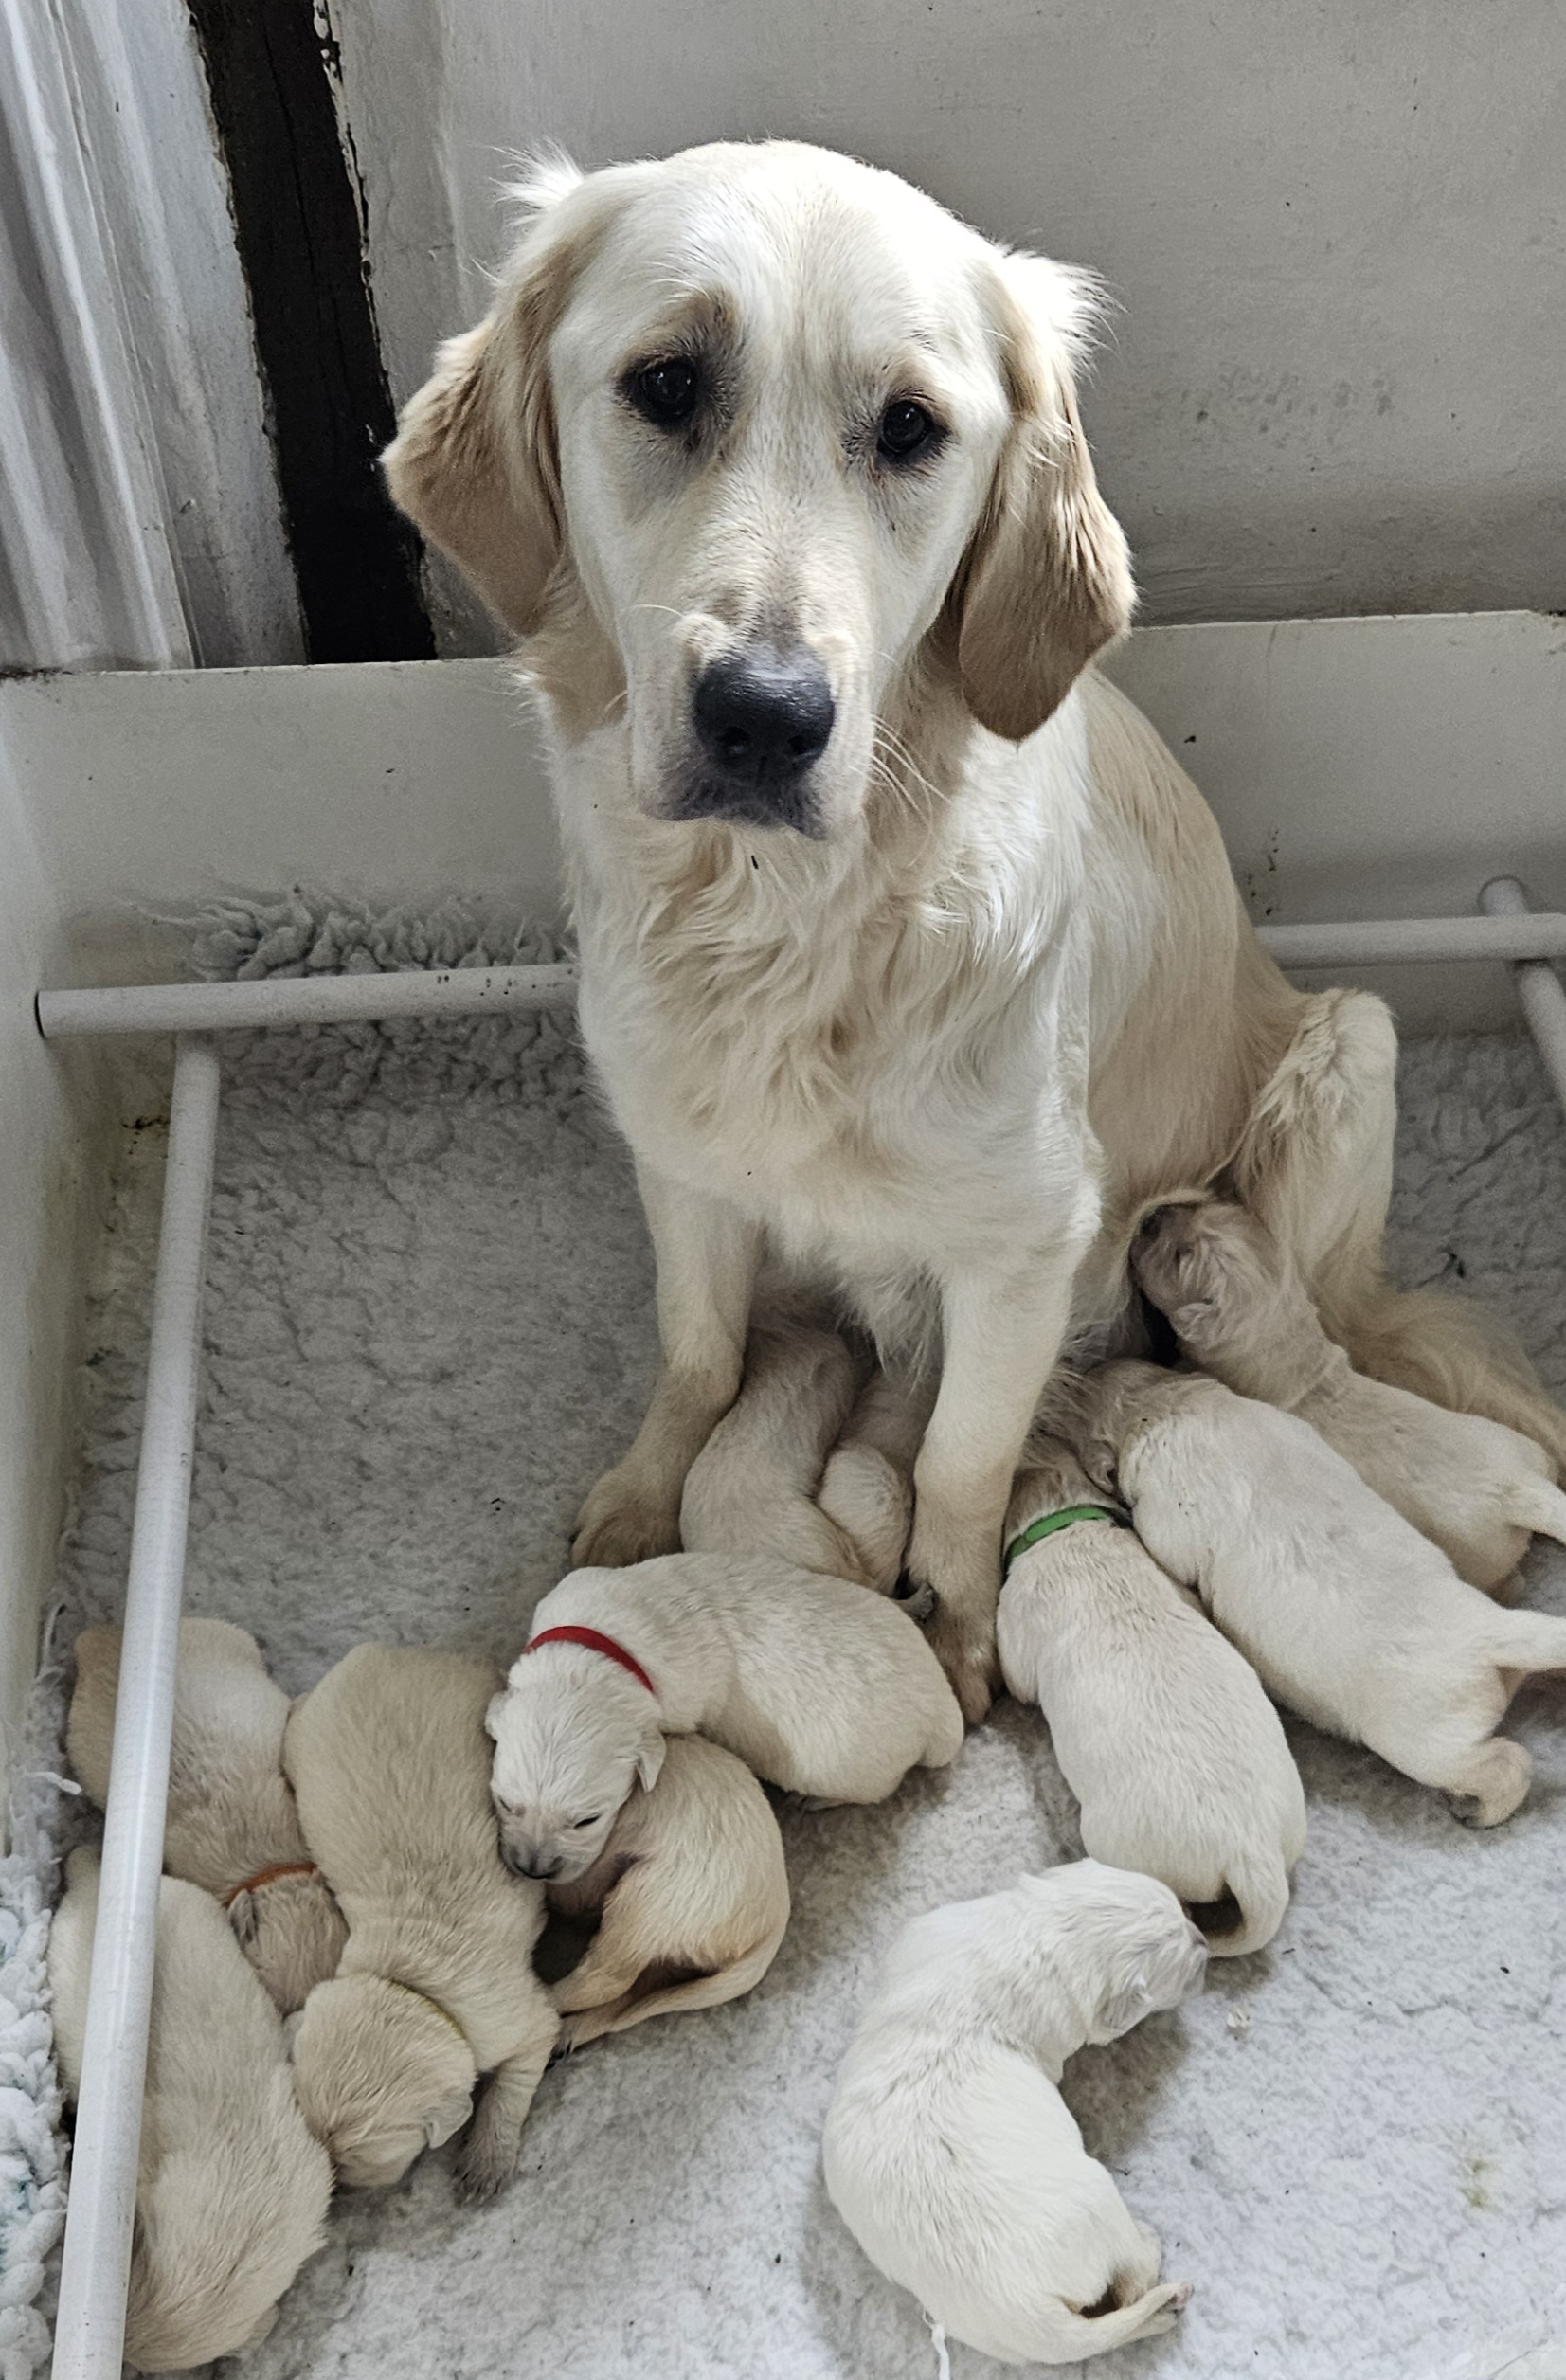 Piper with her pups